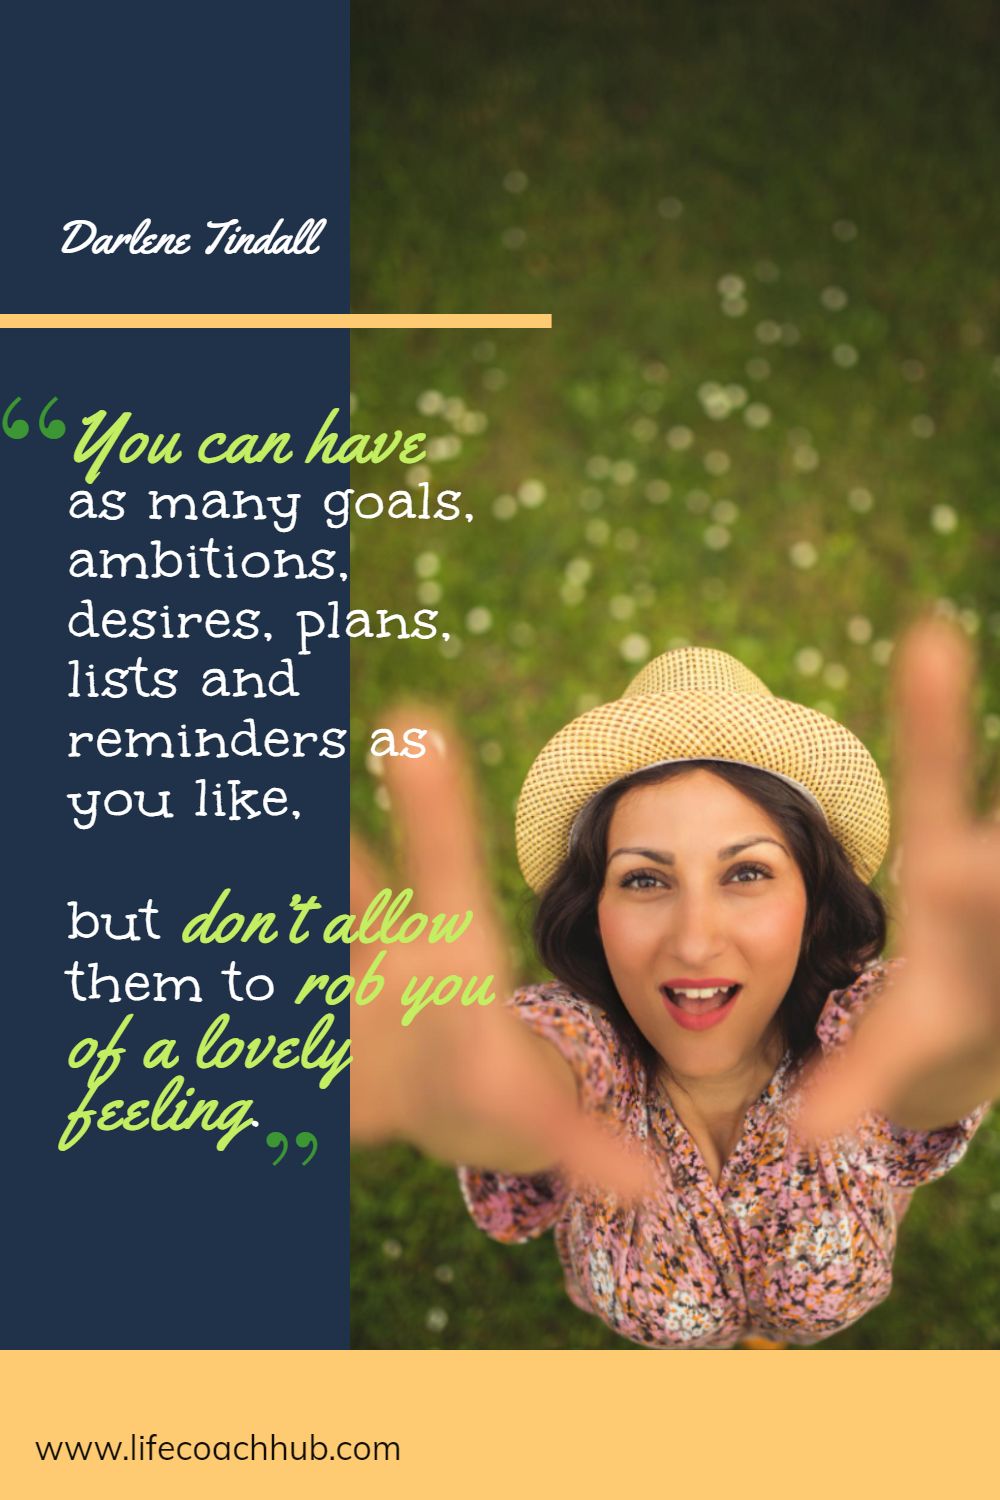 You can have as many goals, ambitions, desires, plans, lists and reminders as you like, but don’t allow them to rob you of a lovely feeling. Darlene Tindall Coaching Quote